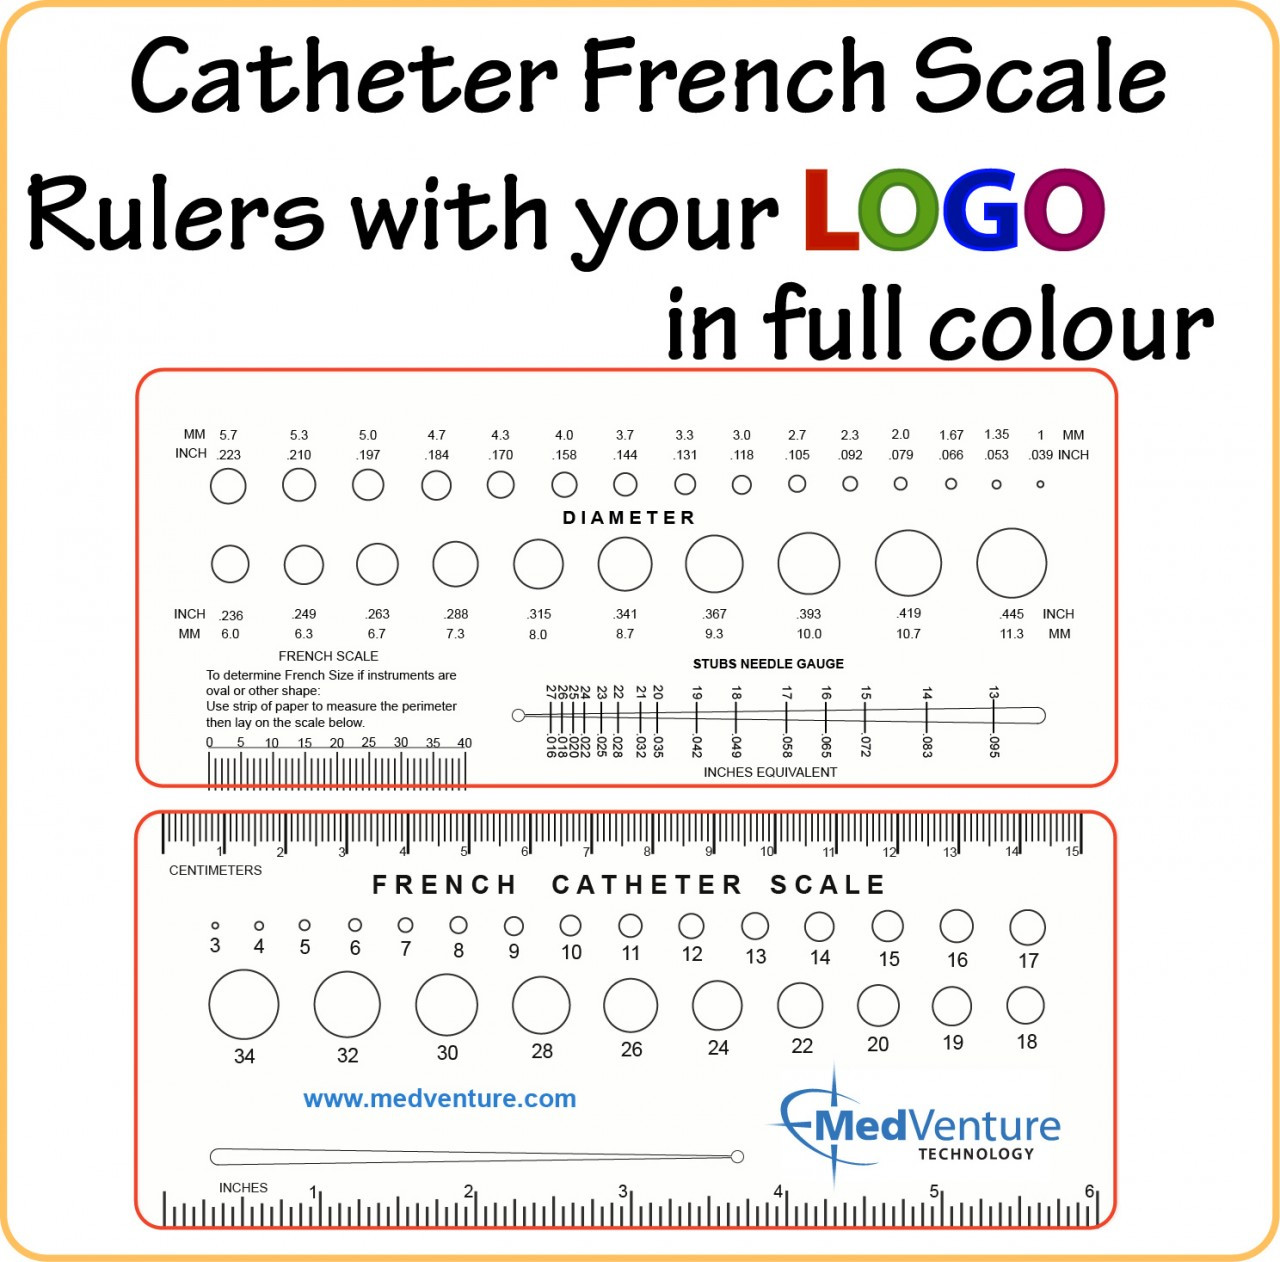 Customised Catheter French Scale made of White PVC with LOGO in Full